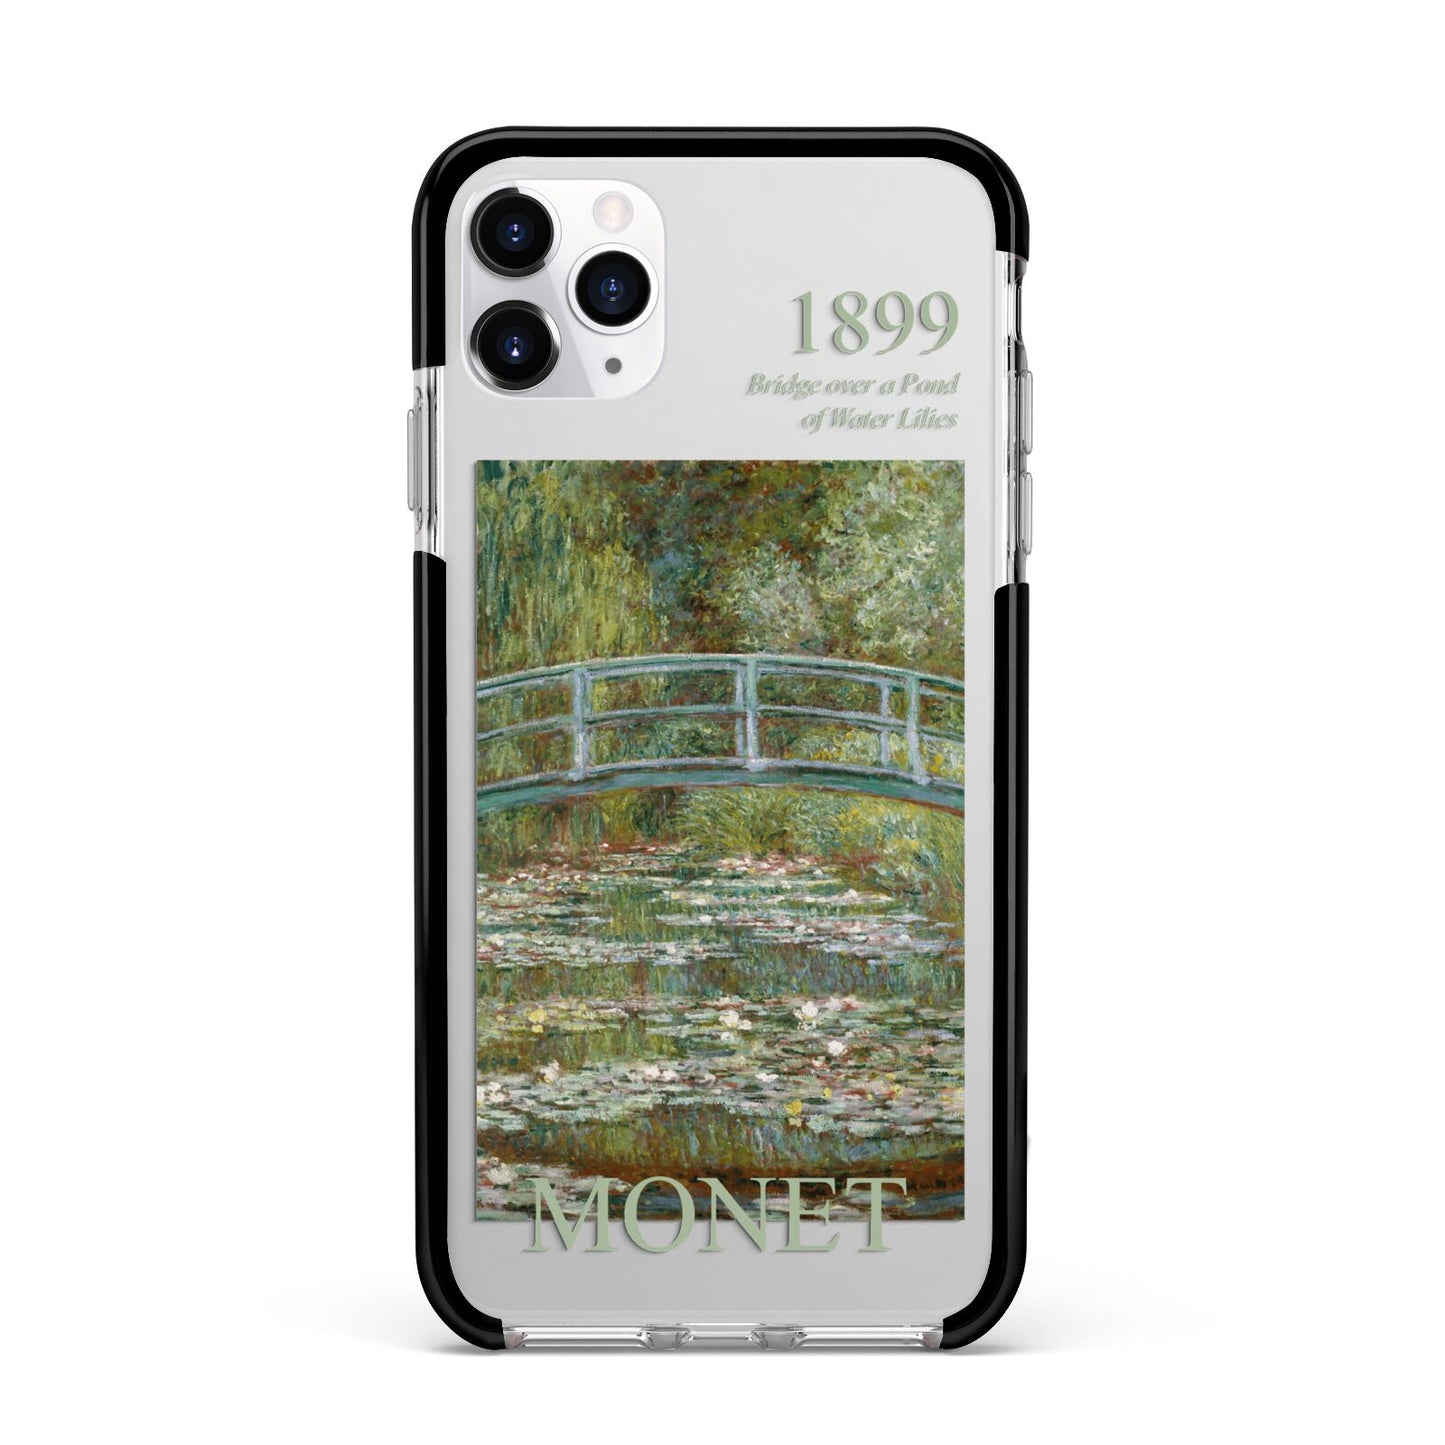 Bridge Over A Pond Of Water Lilies By Monet Apple iPhone 11 Pro Max in Silver with Black Impact Case